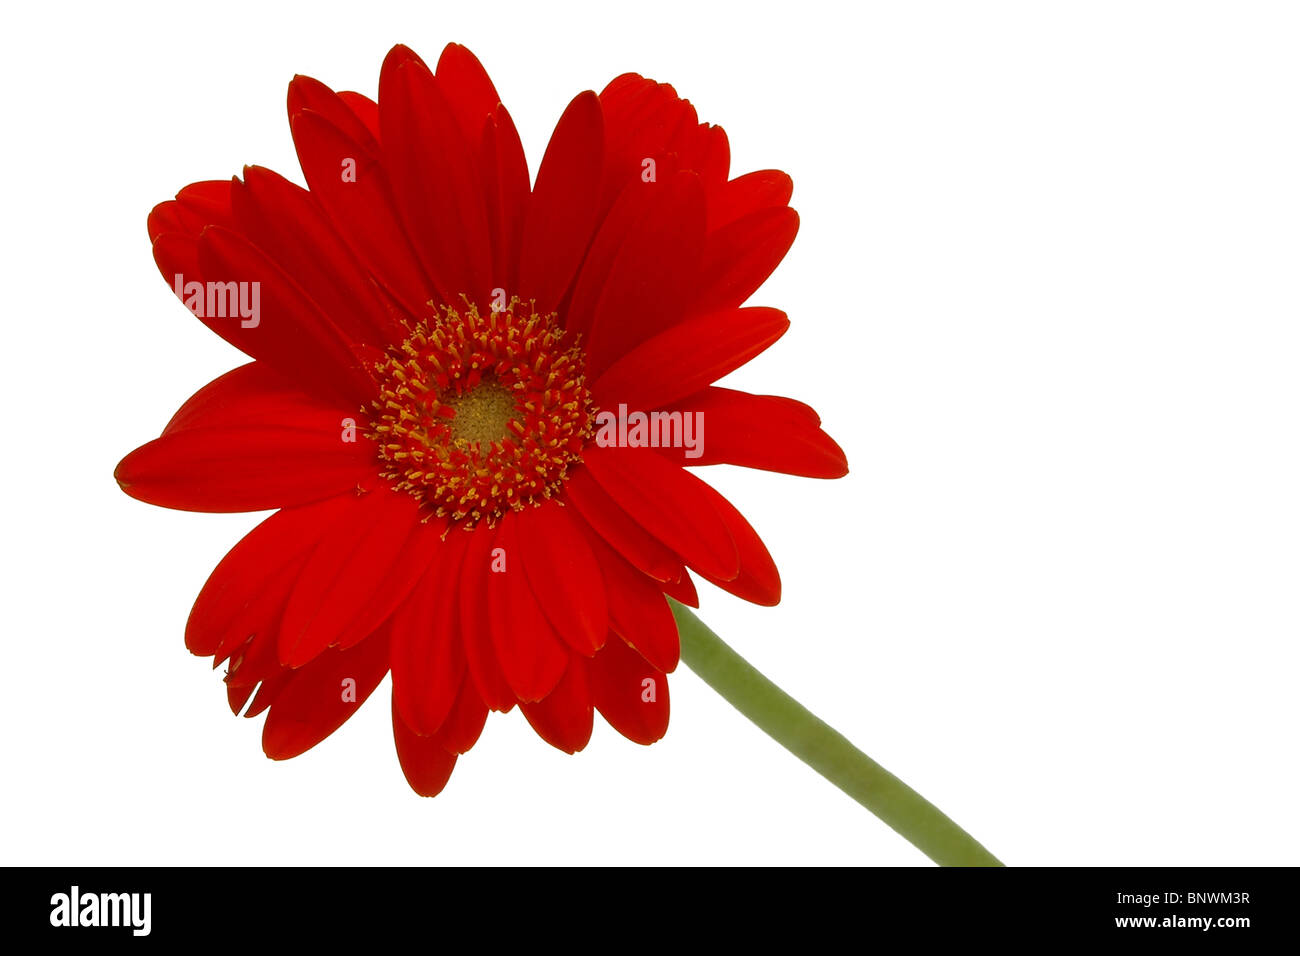 Red daisy flower isolated on a white background. Stock Photo